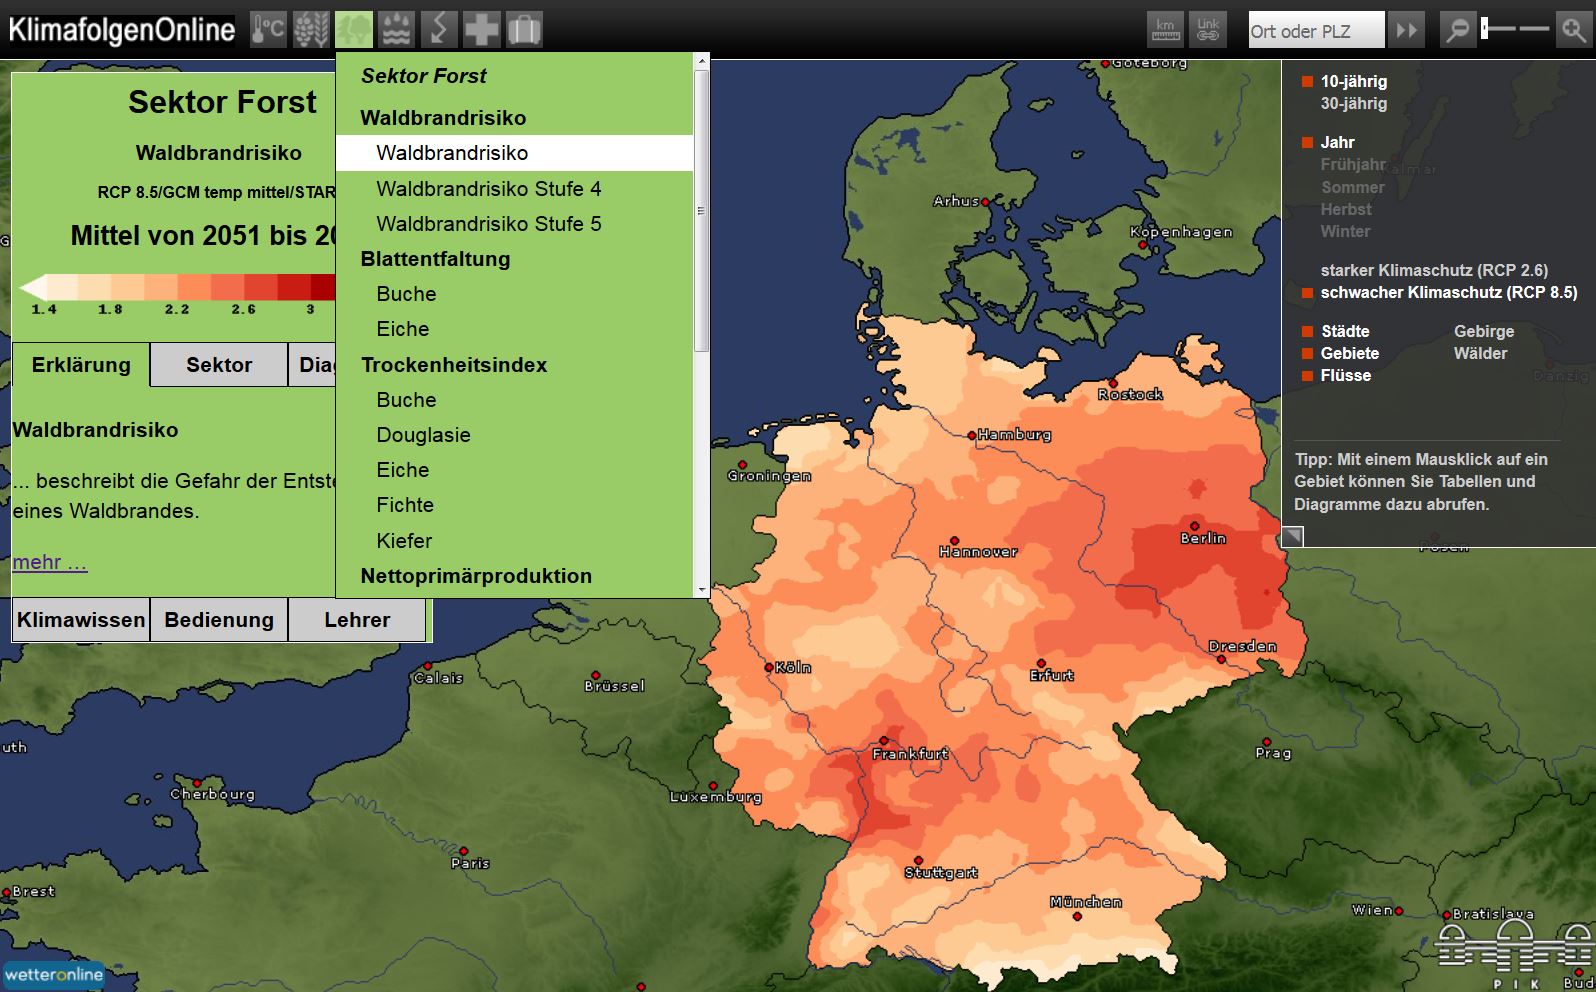 A new education platform on climate impacts for Germany